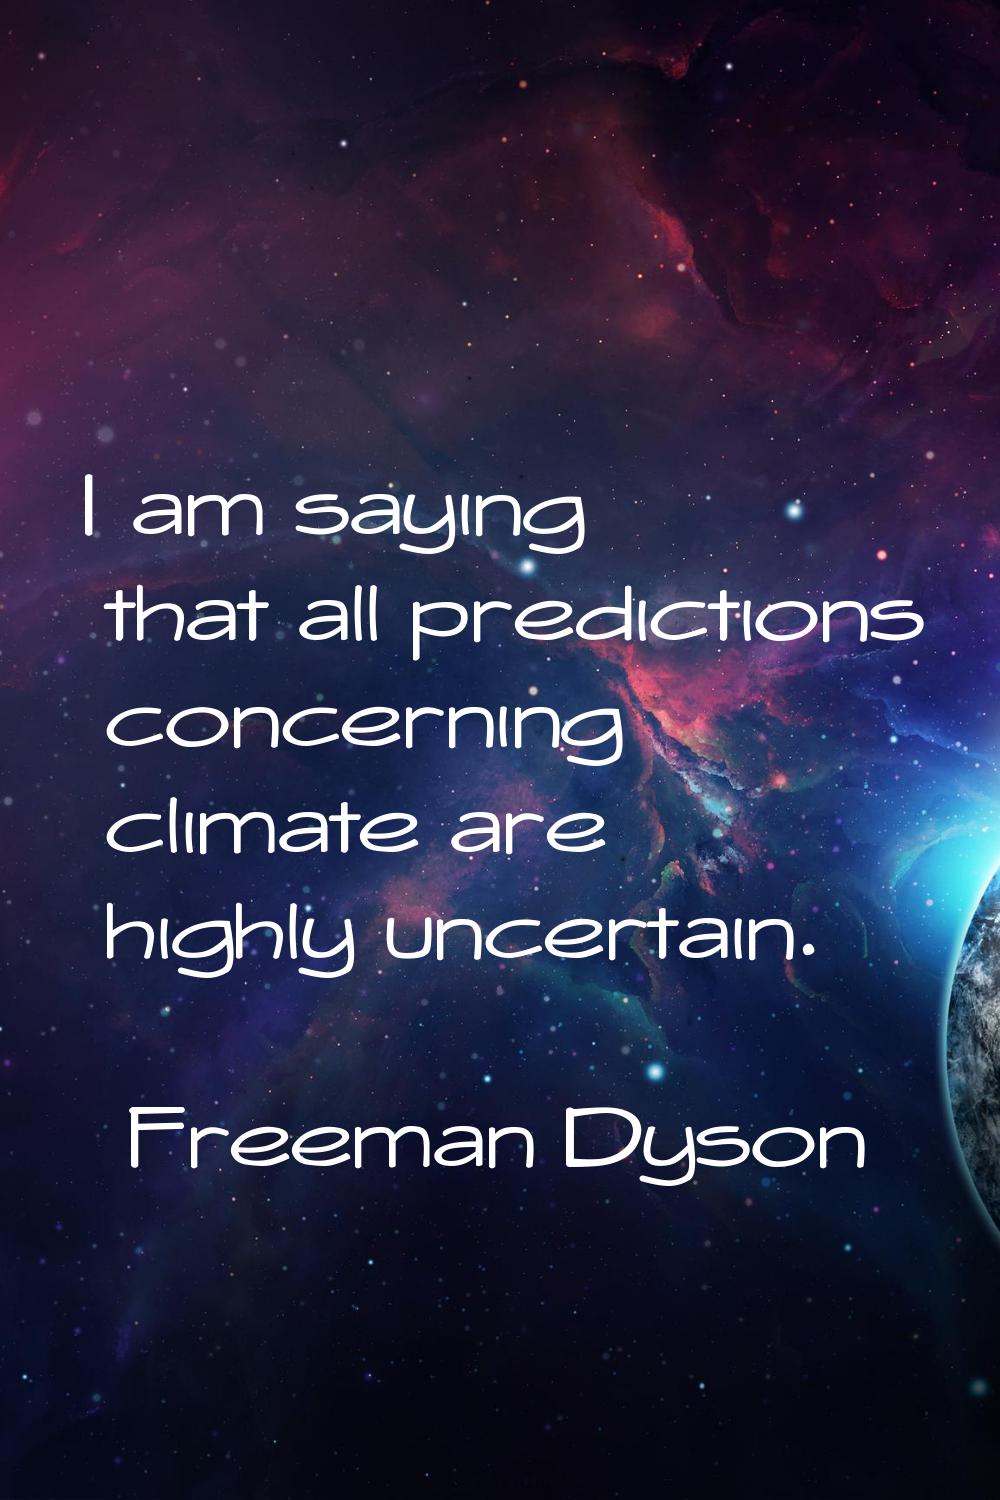 I am saying that all predictions concerning climate are highly uncertain.